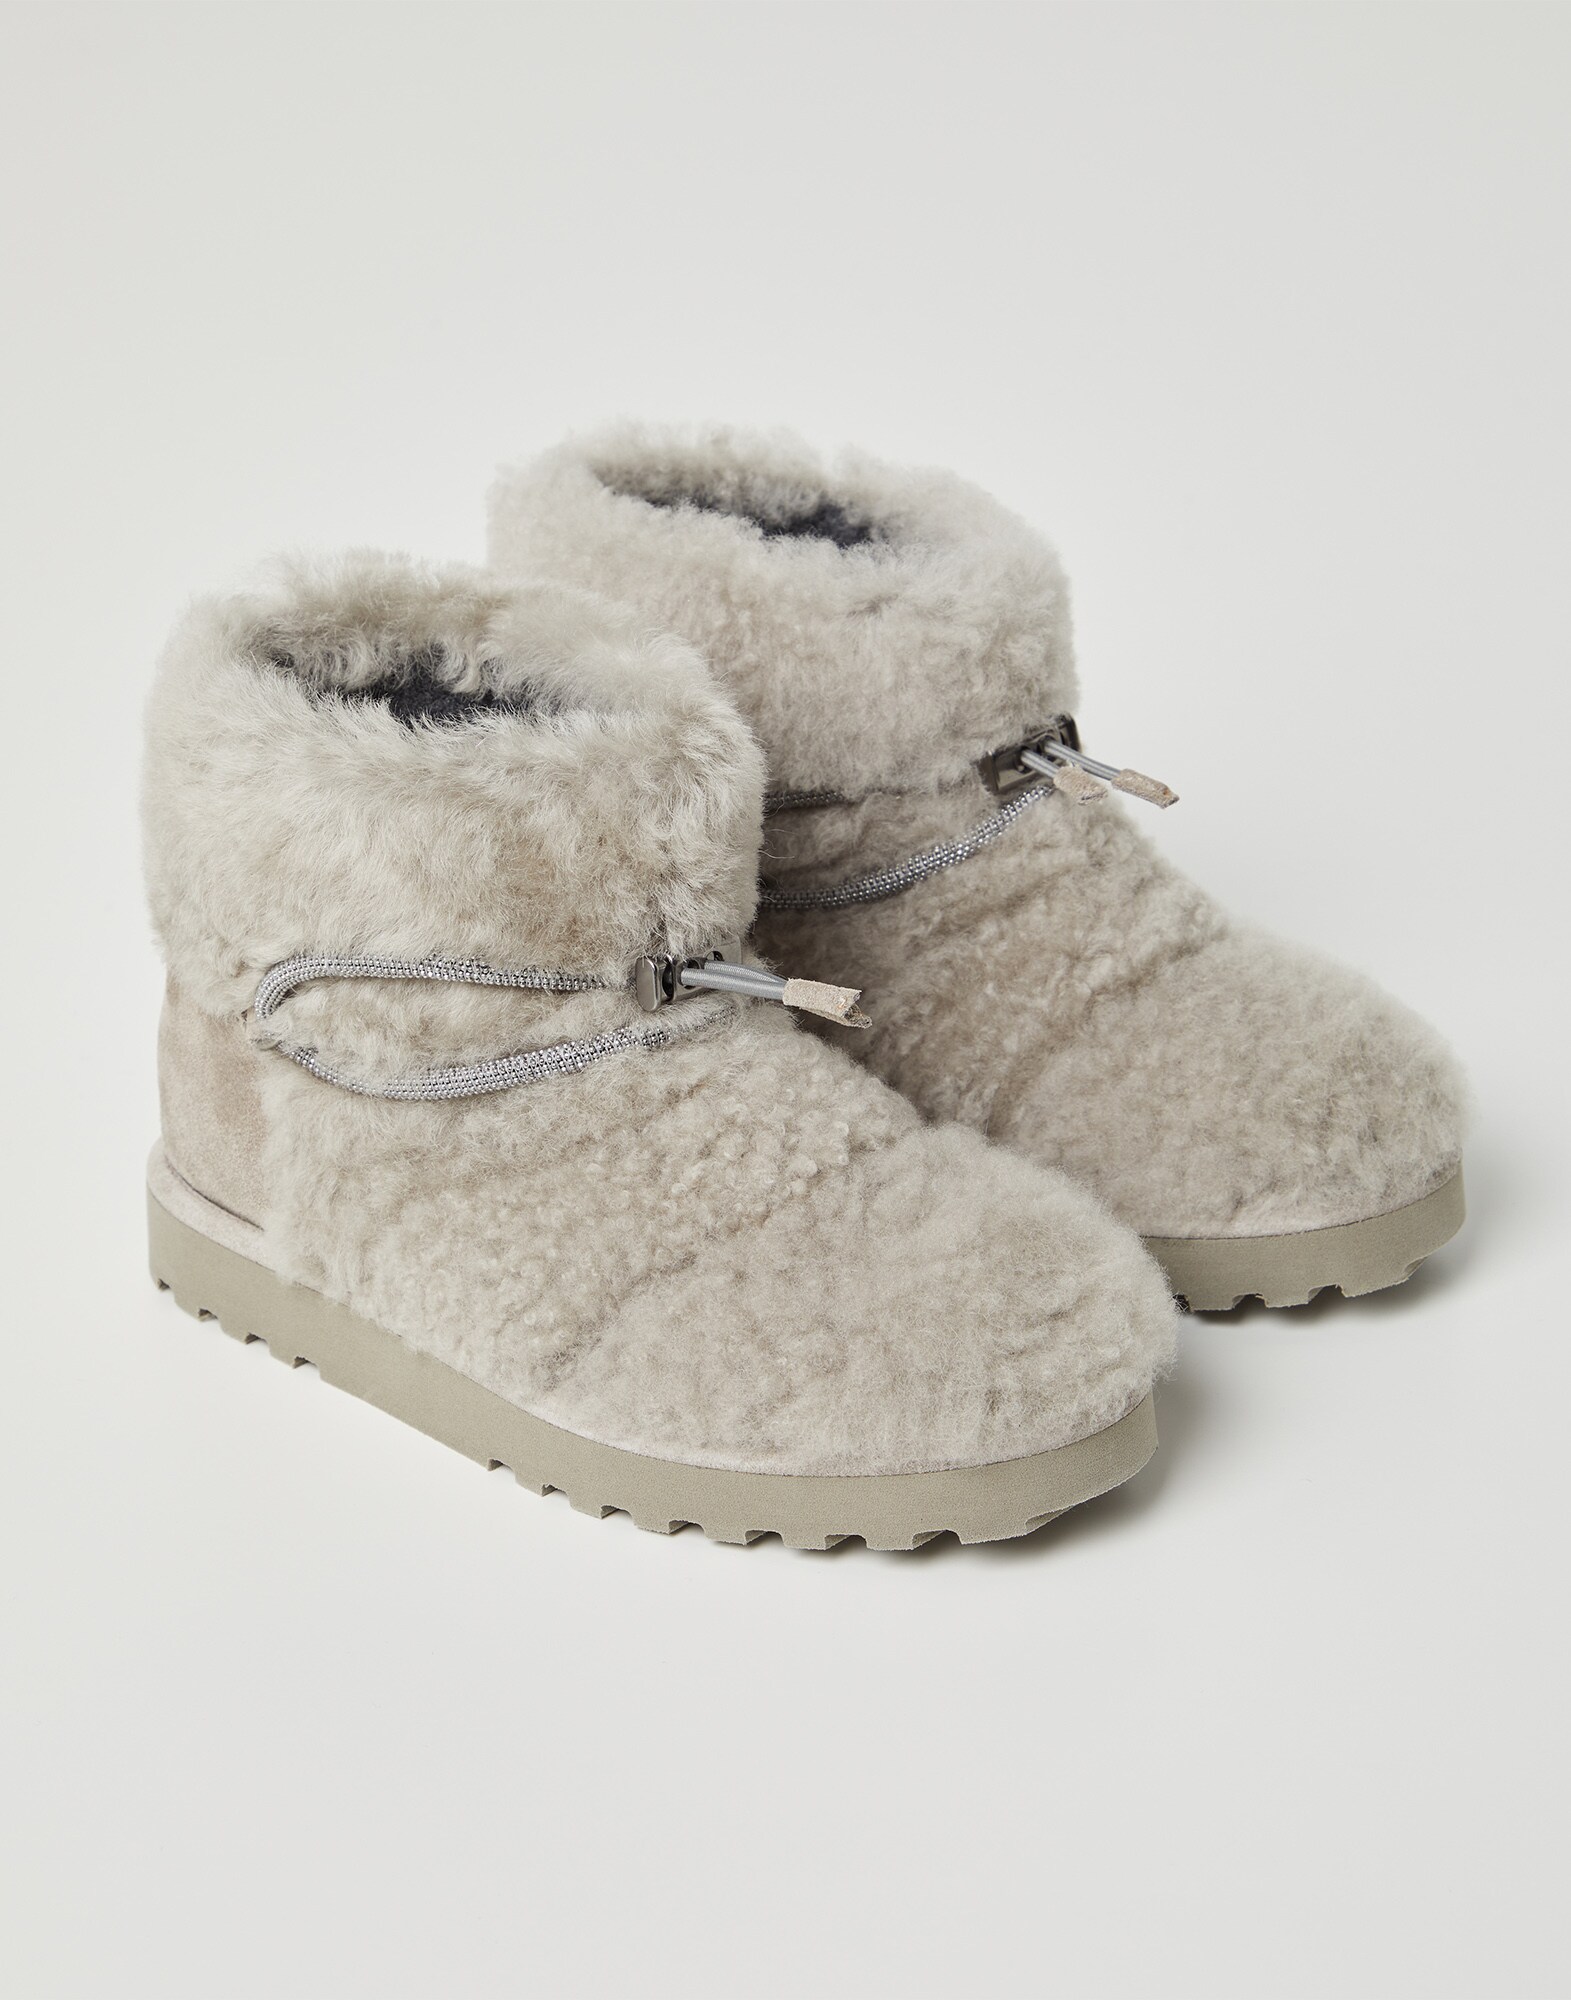 Shearling boots